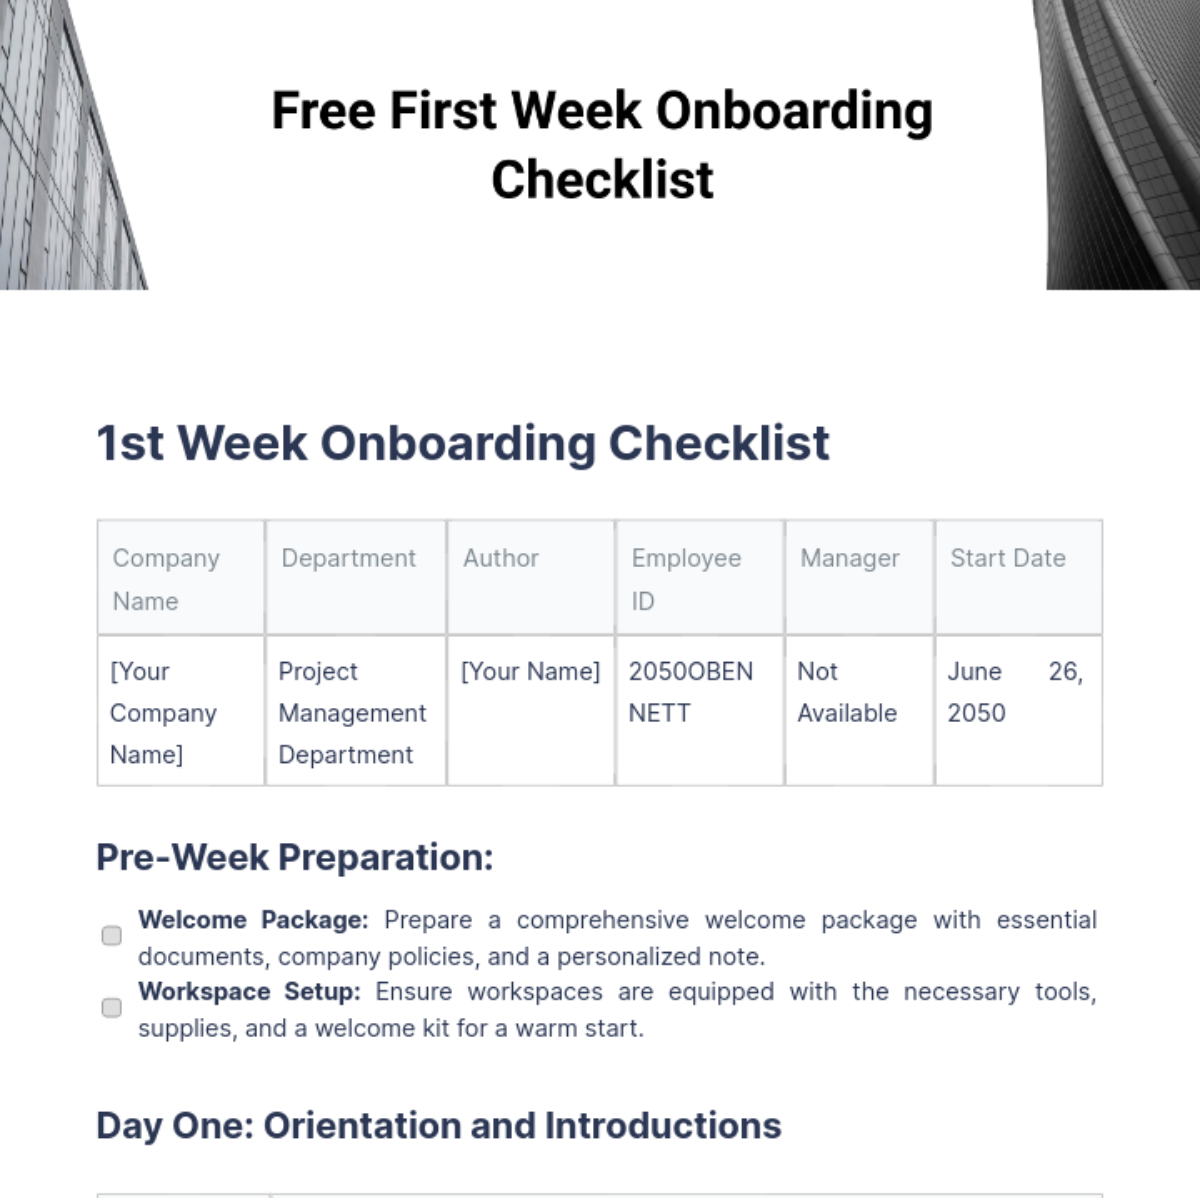 Free First Week Onboarding Checklist Template